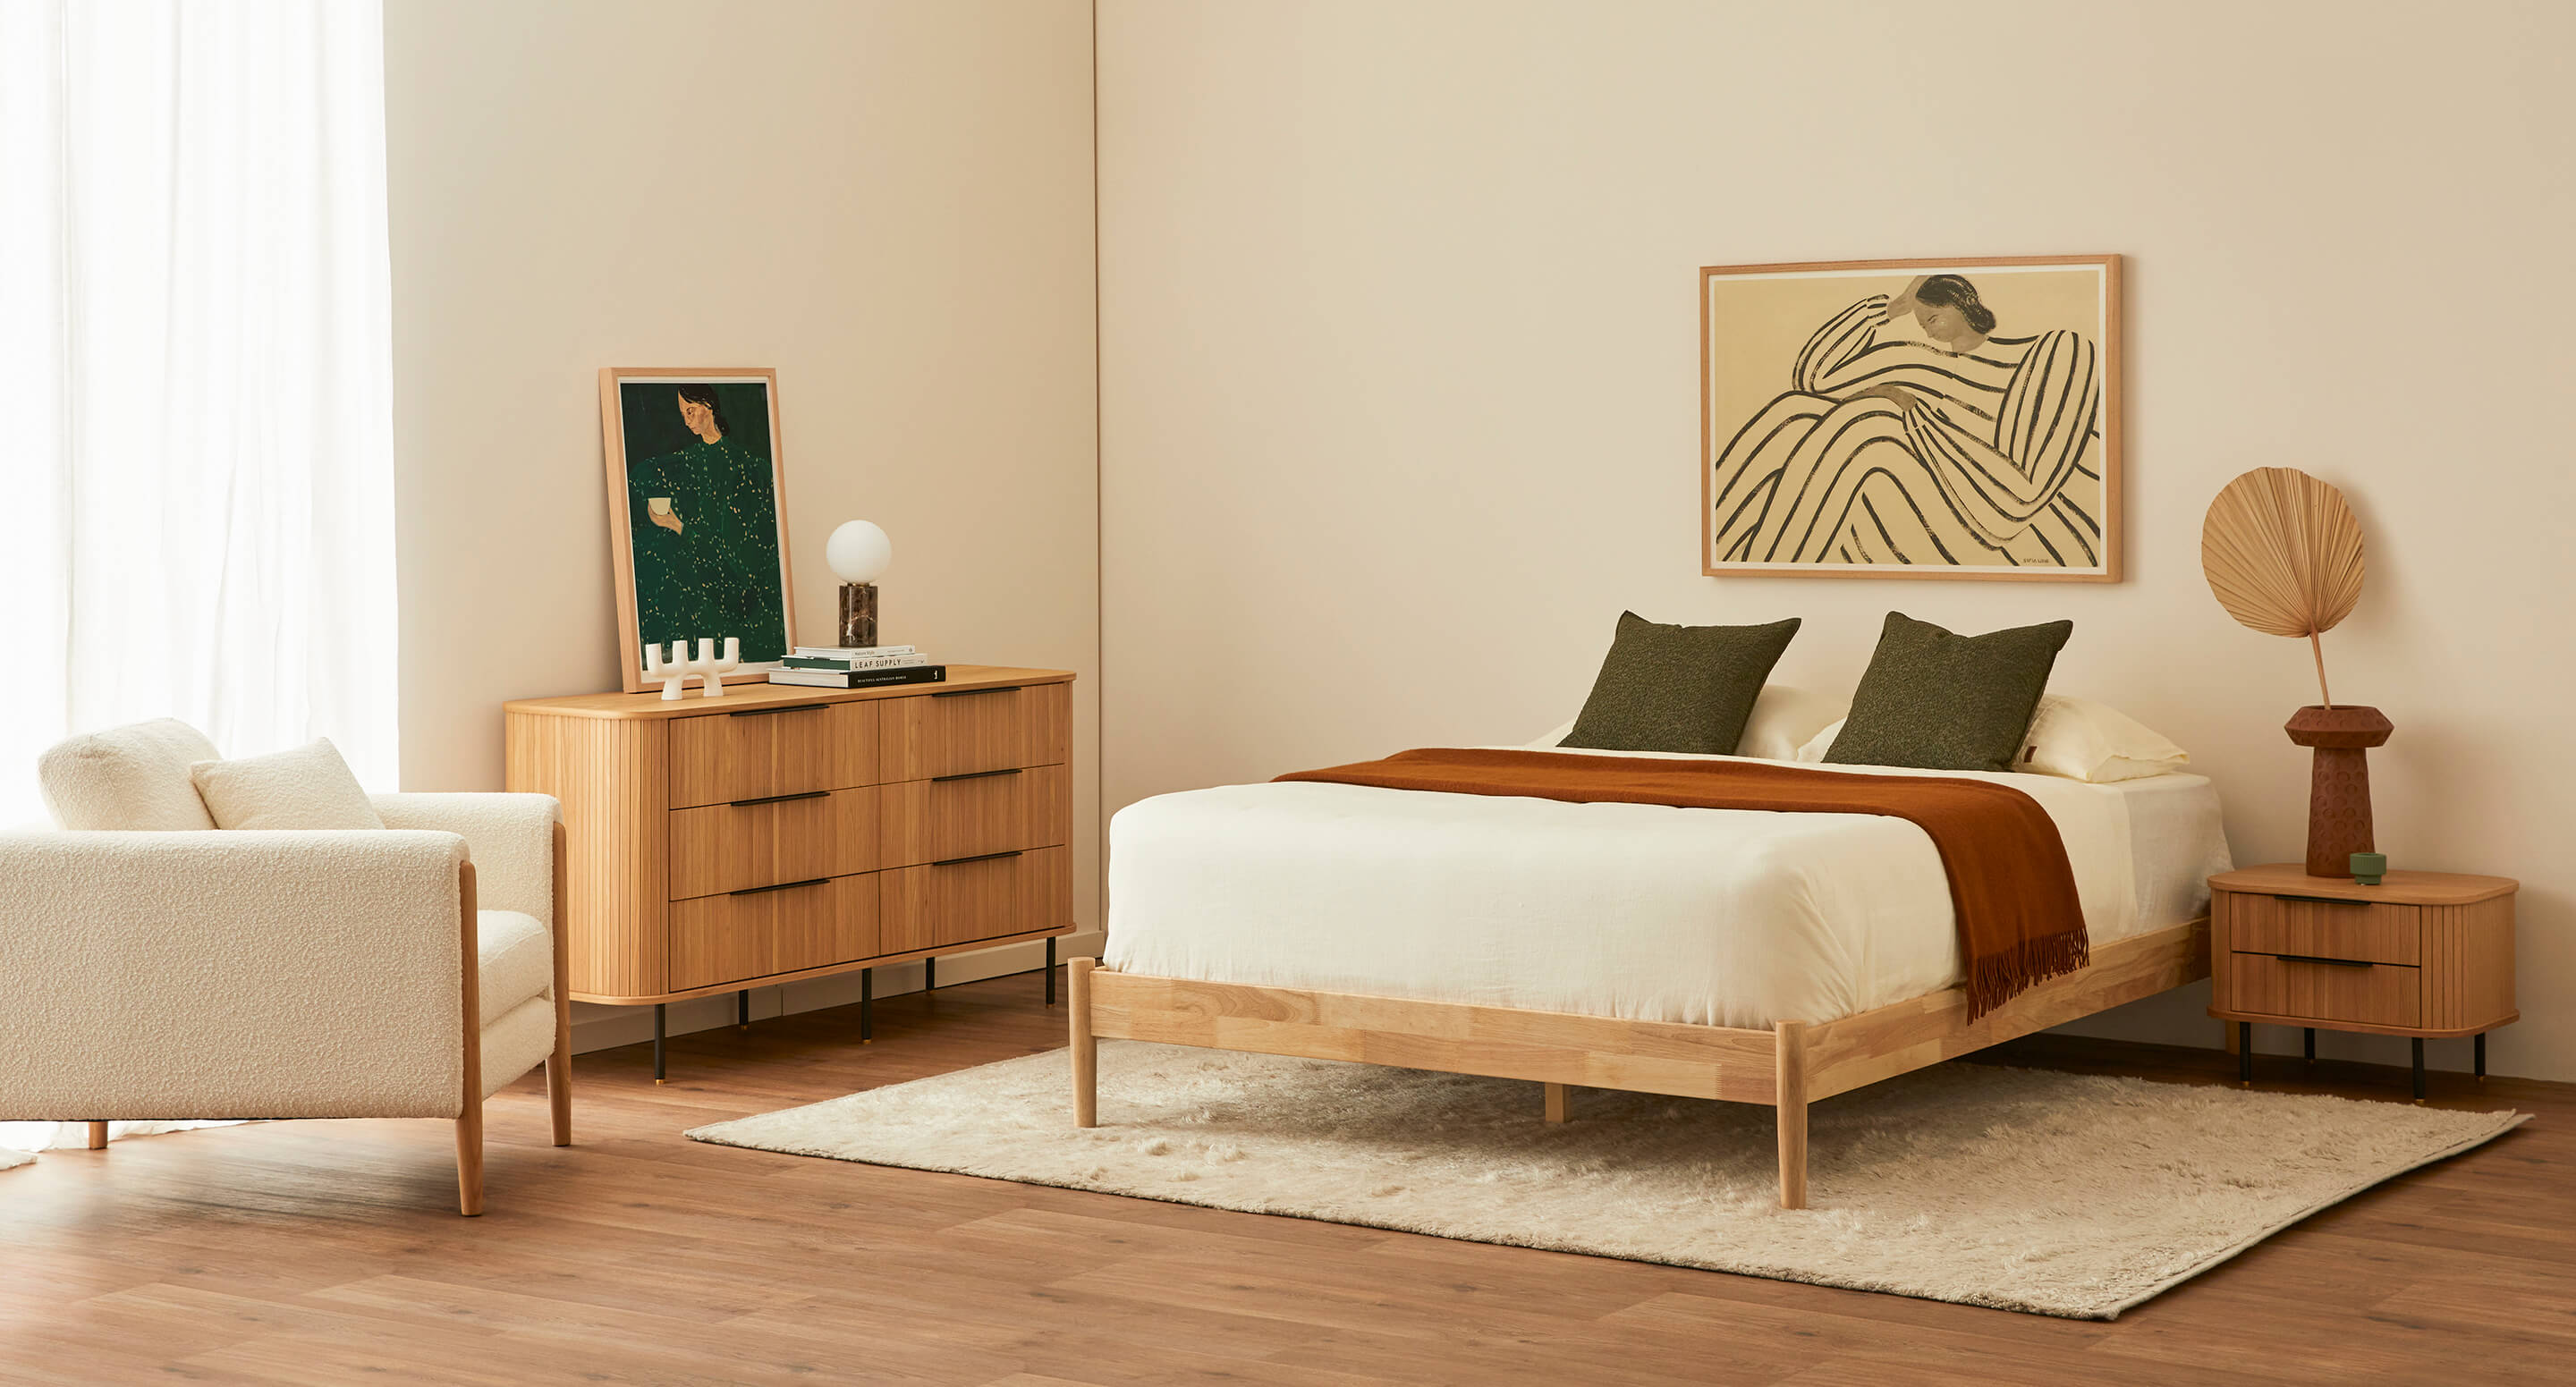 Introducing the Rio styled space as part of our Abode AW22 collection, full of neutral tones, oak slatted furniture, and dreamy decor in this bedroom space. Shop the collection online or in-store now!